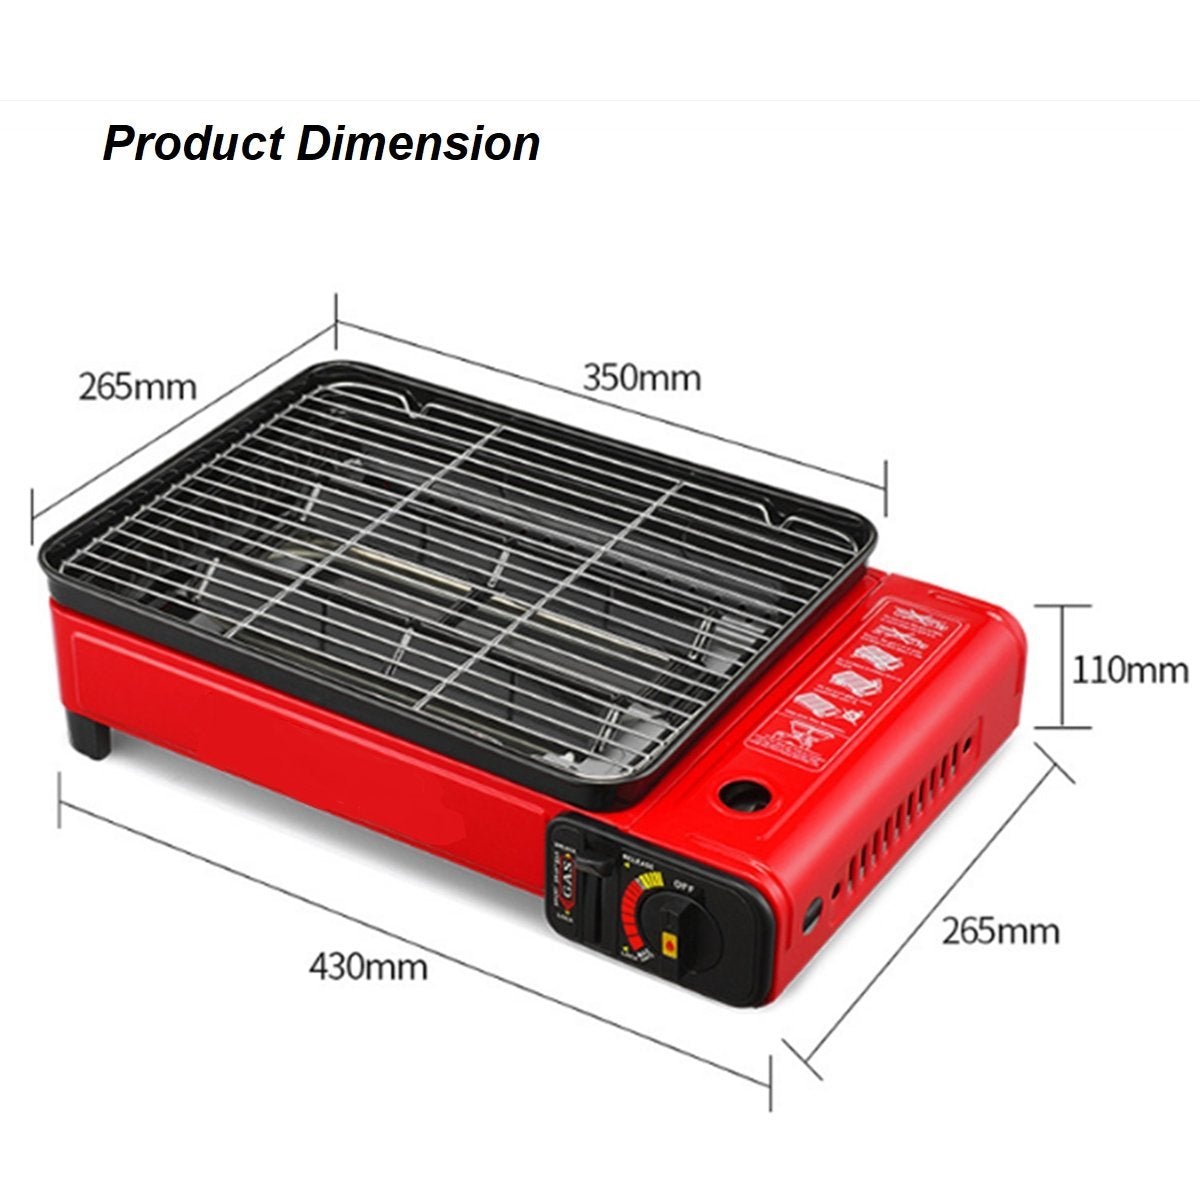 Portable Gas Stove Burner Butane BBQ Camping Gas Cooker With Non Stick Plate Black without Fish Pan and Lid - Outdoorium